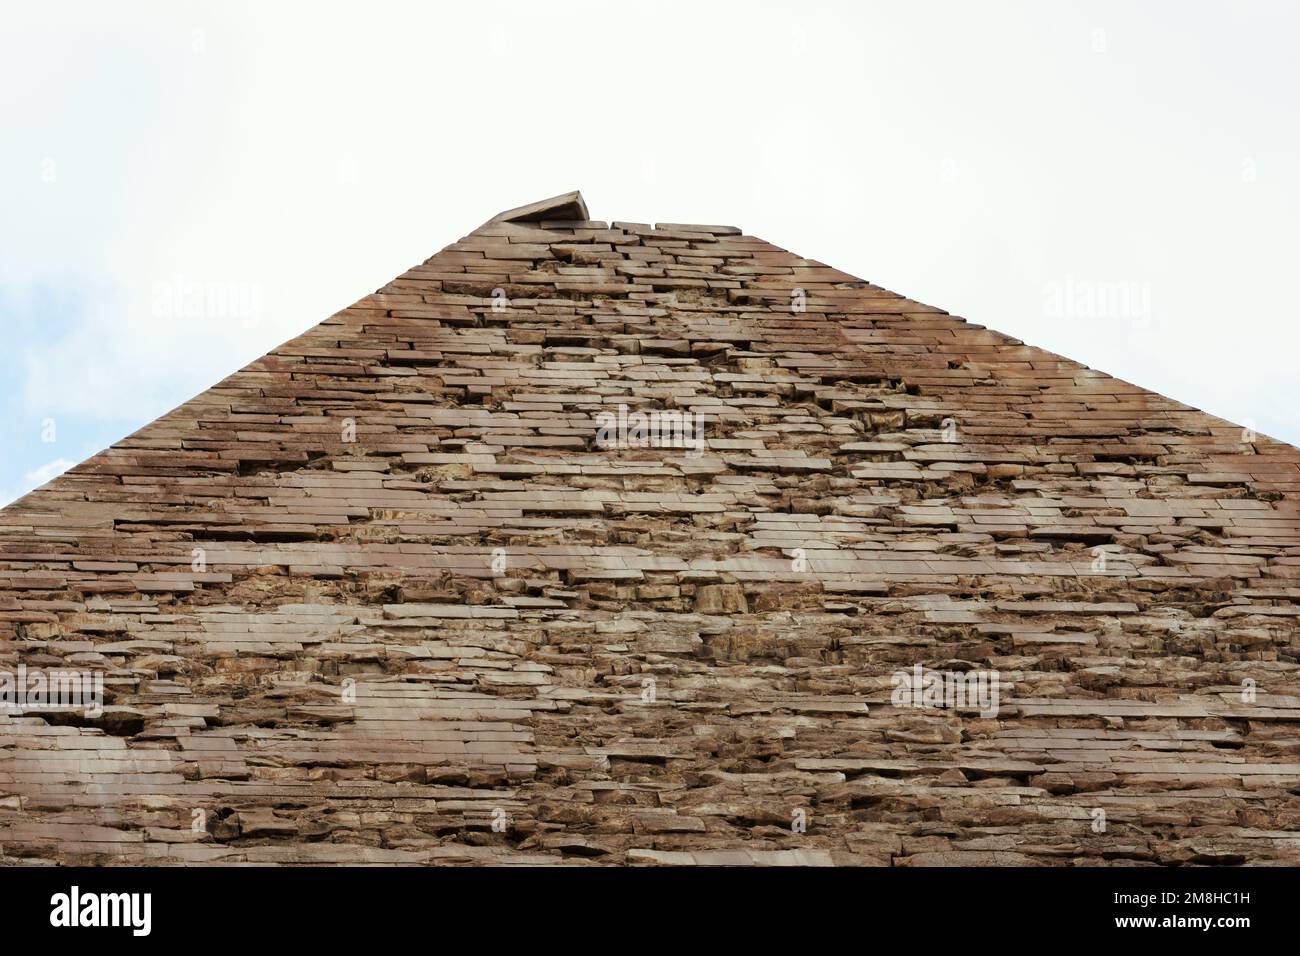 Tiled top of the pyramid of Khafre or of Chephren the second-tallest and second-largest of the 3 Ancient Egyptian Pyramids of Giza and the tomb of the Stock Photo